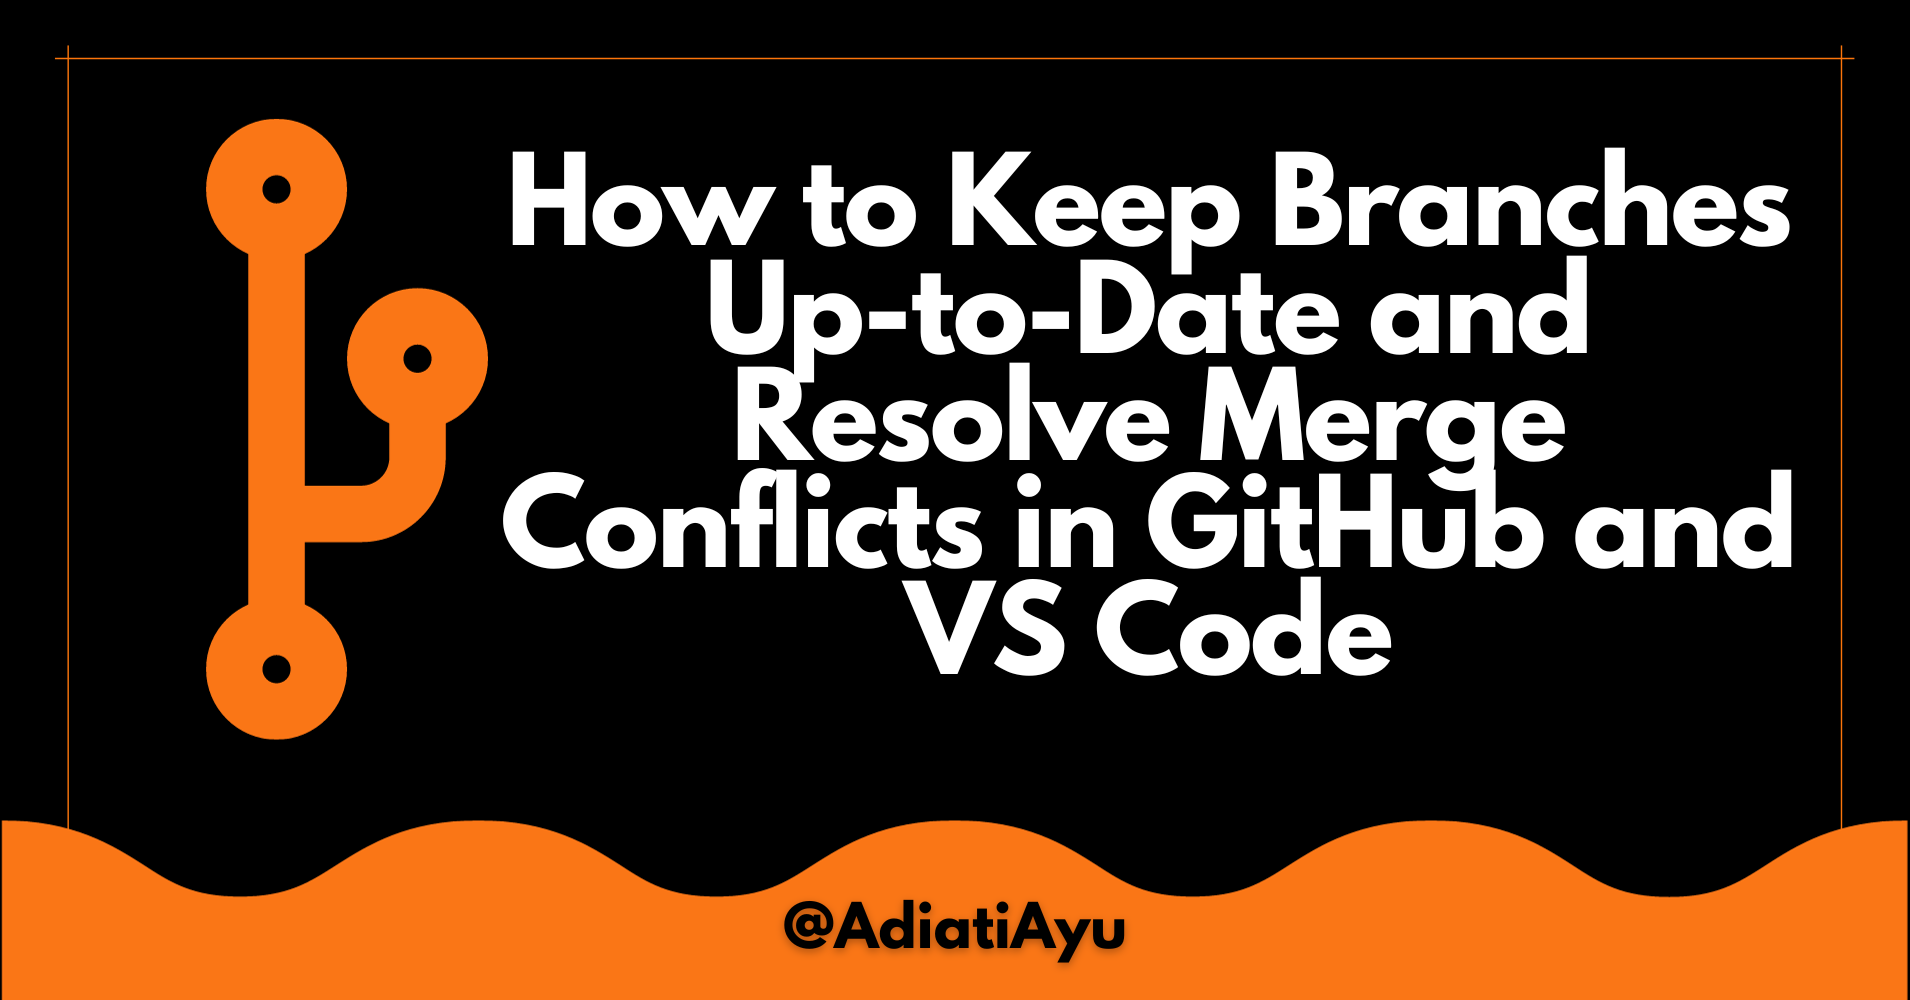 How to Keep Branches Up-to-Date and Resolve Merge Conflicts in GitHub and VS Code